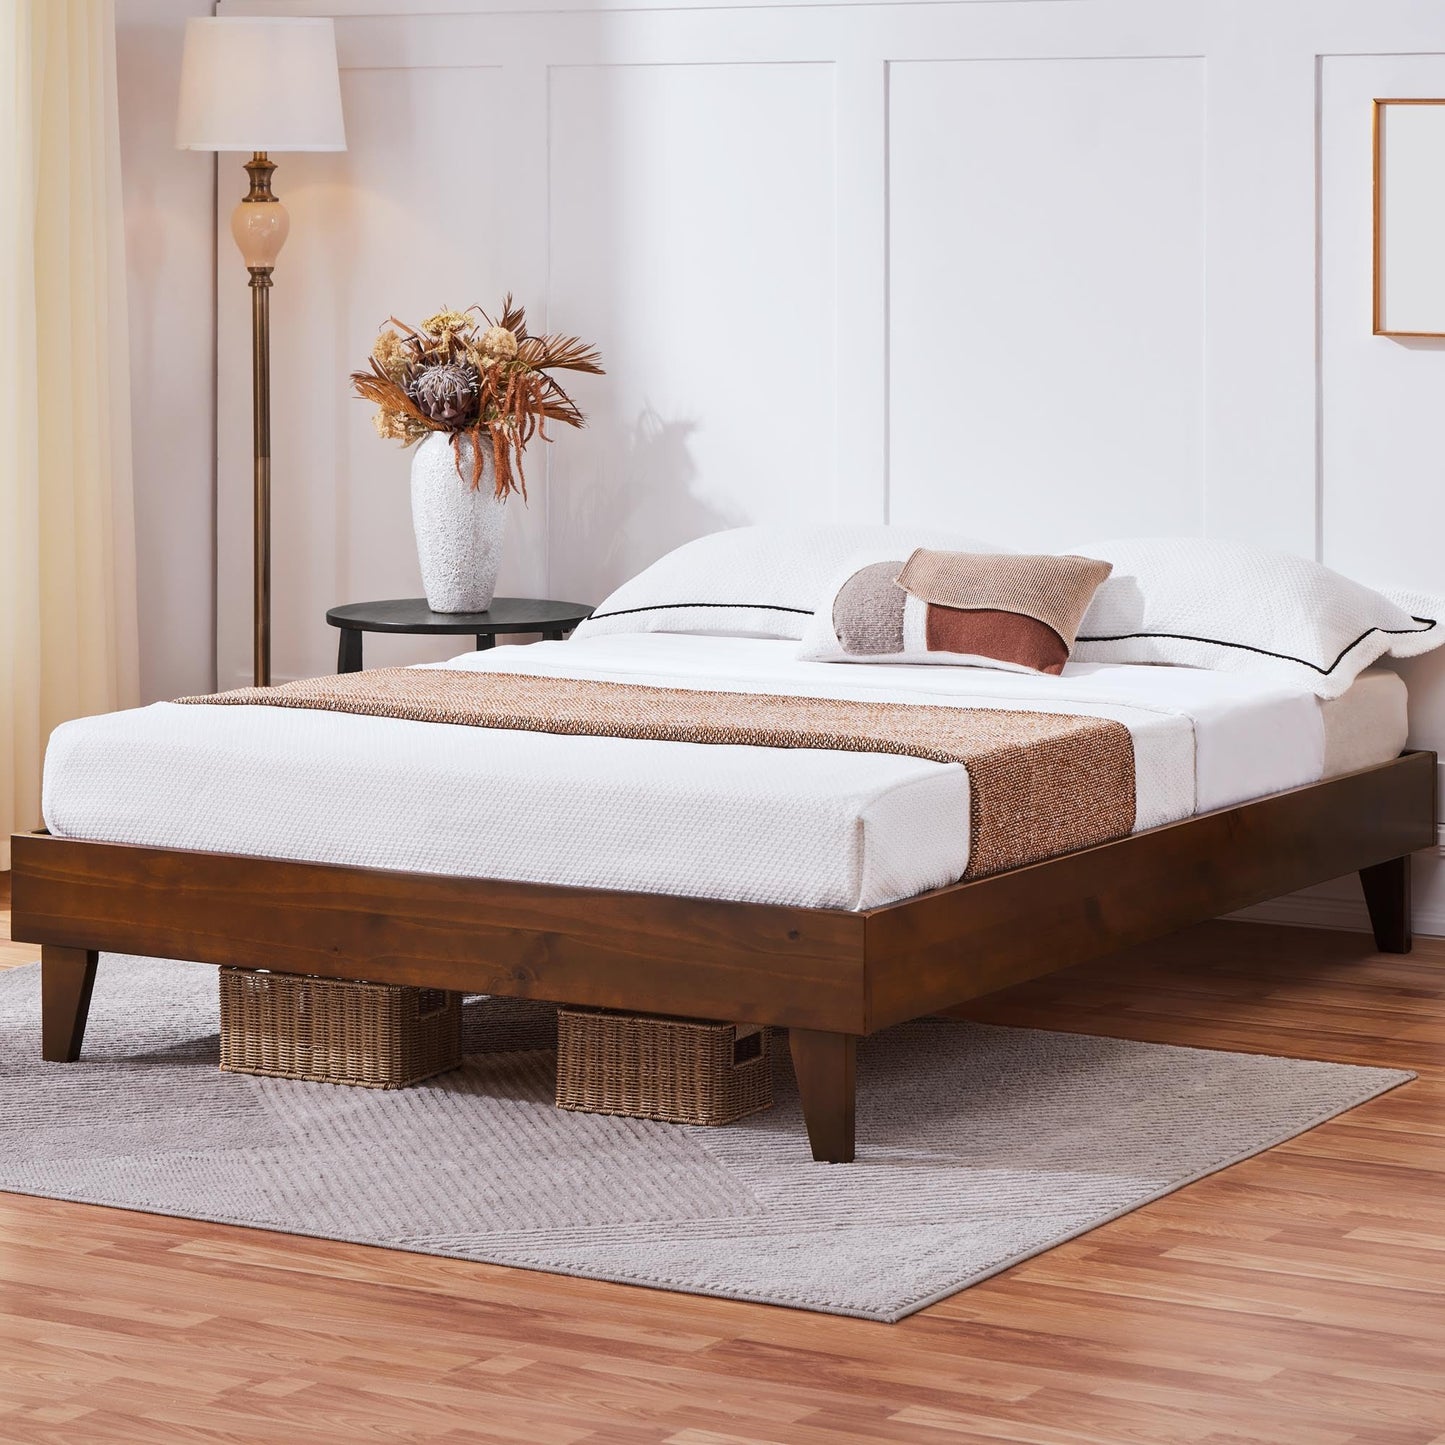 Yaheetech Queen Solid Pine Wood Platform Bed Frame - Reserved Holes for Headboard, Wooden Slats Support, 7.5" Clearance, No Noise, Easy Assembly -